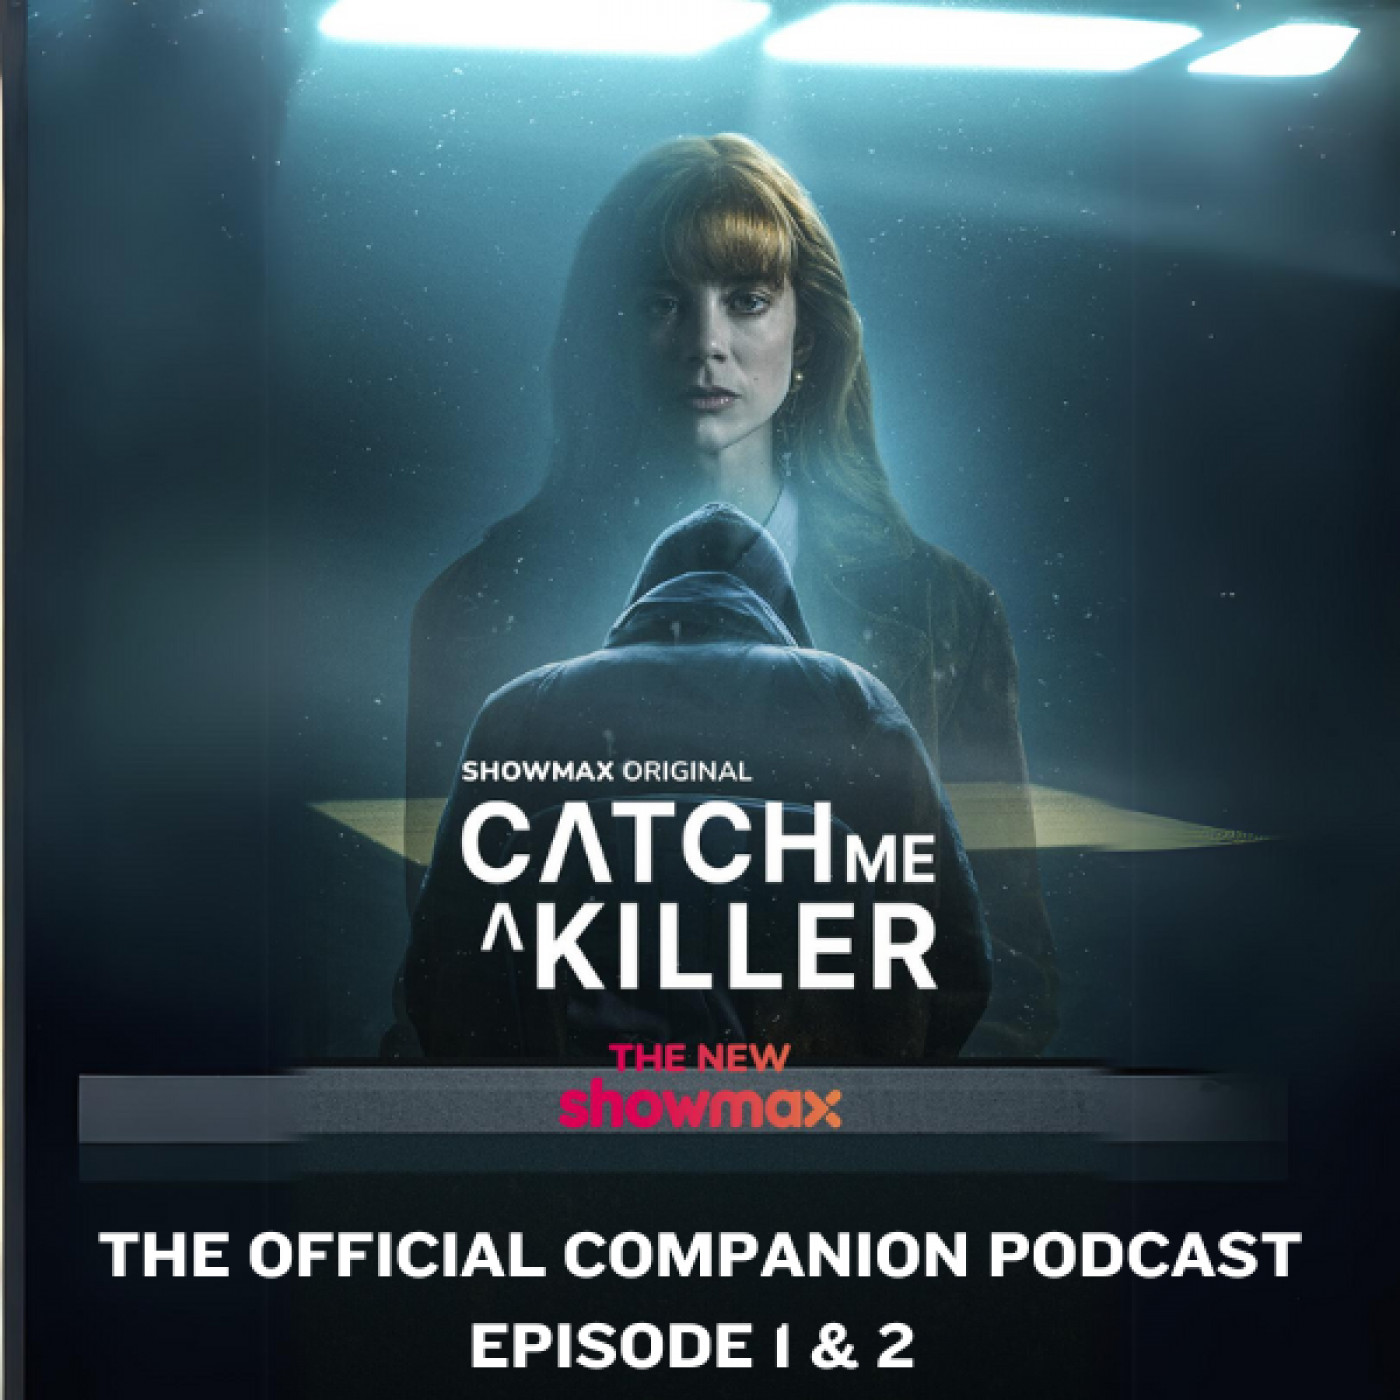 Catch Me A Killer: Official Companion Podcast Brought to you by Showmax (Ep 1 & 2)